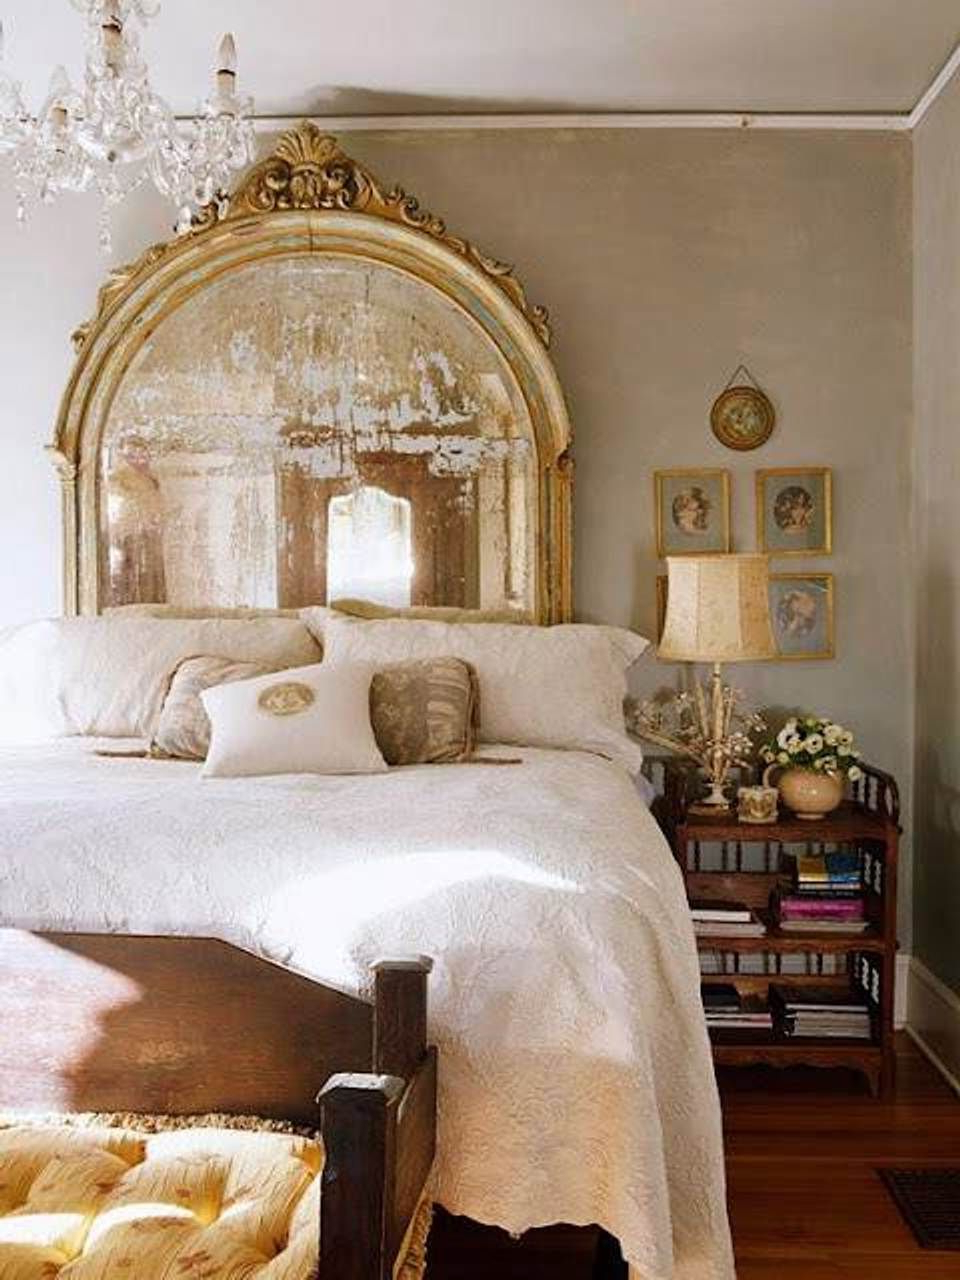 Victorian Bedroom Decorating Ideas For Women Looks Like